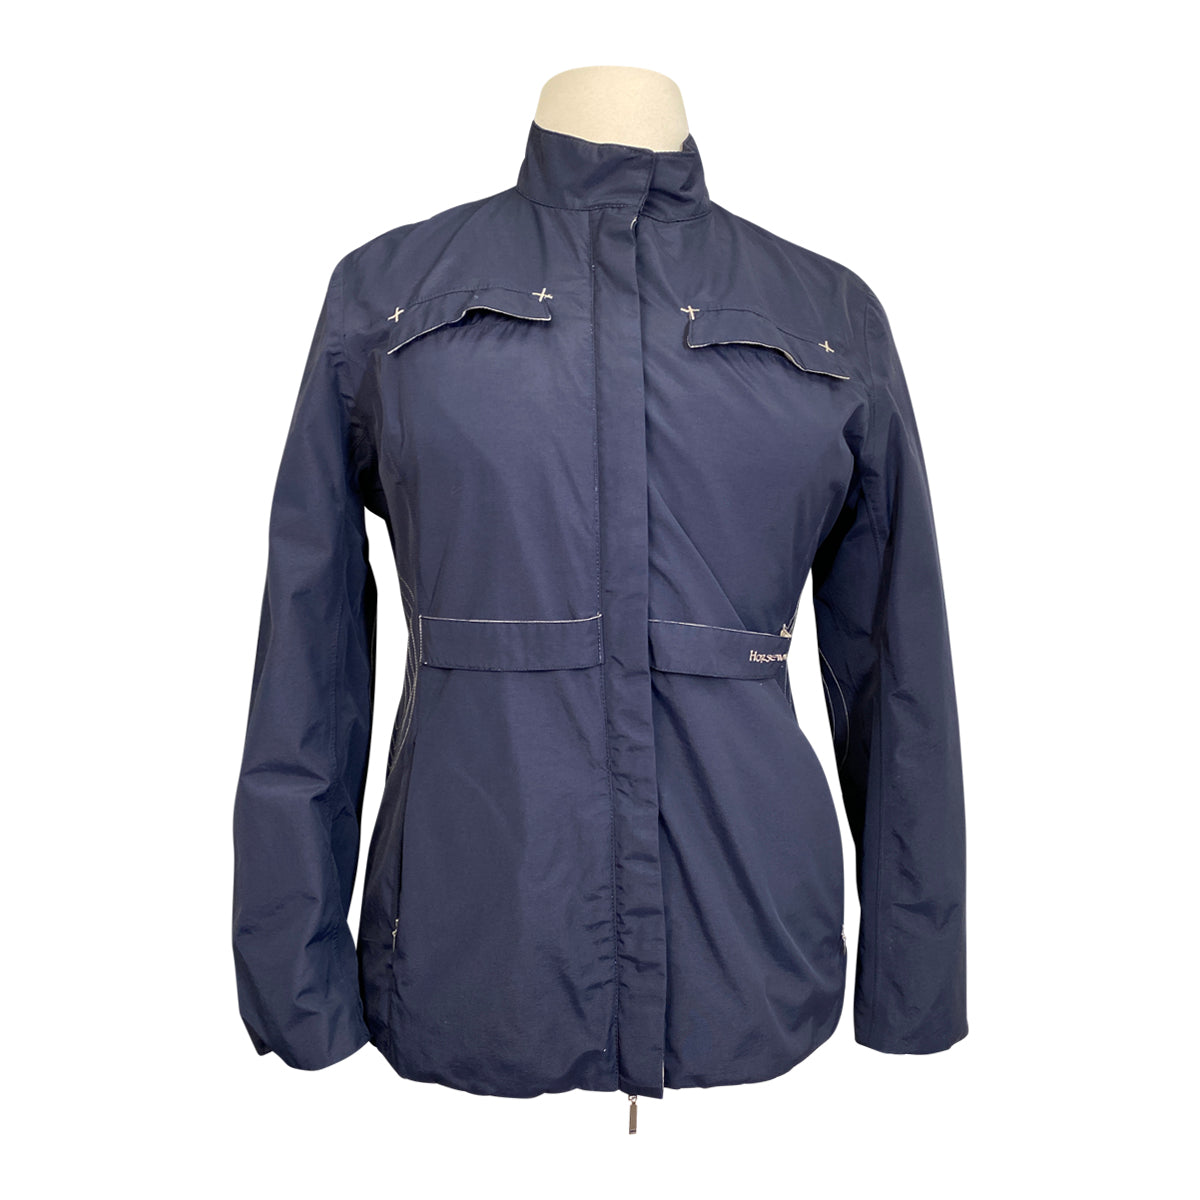 Horsewear Irland Soft Shell Jacket in Navy